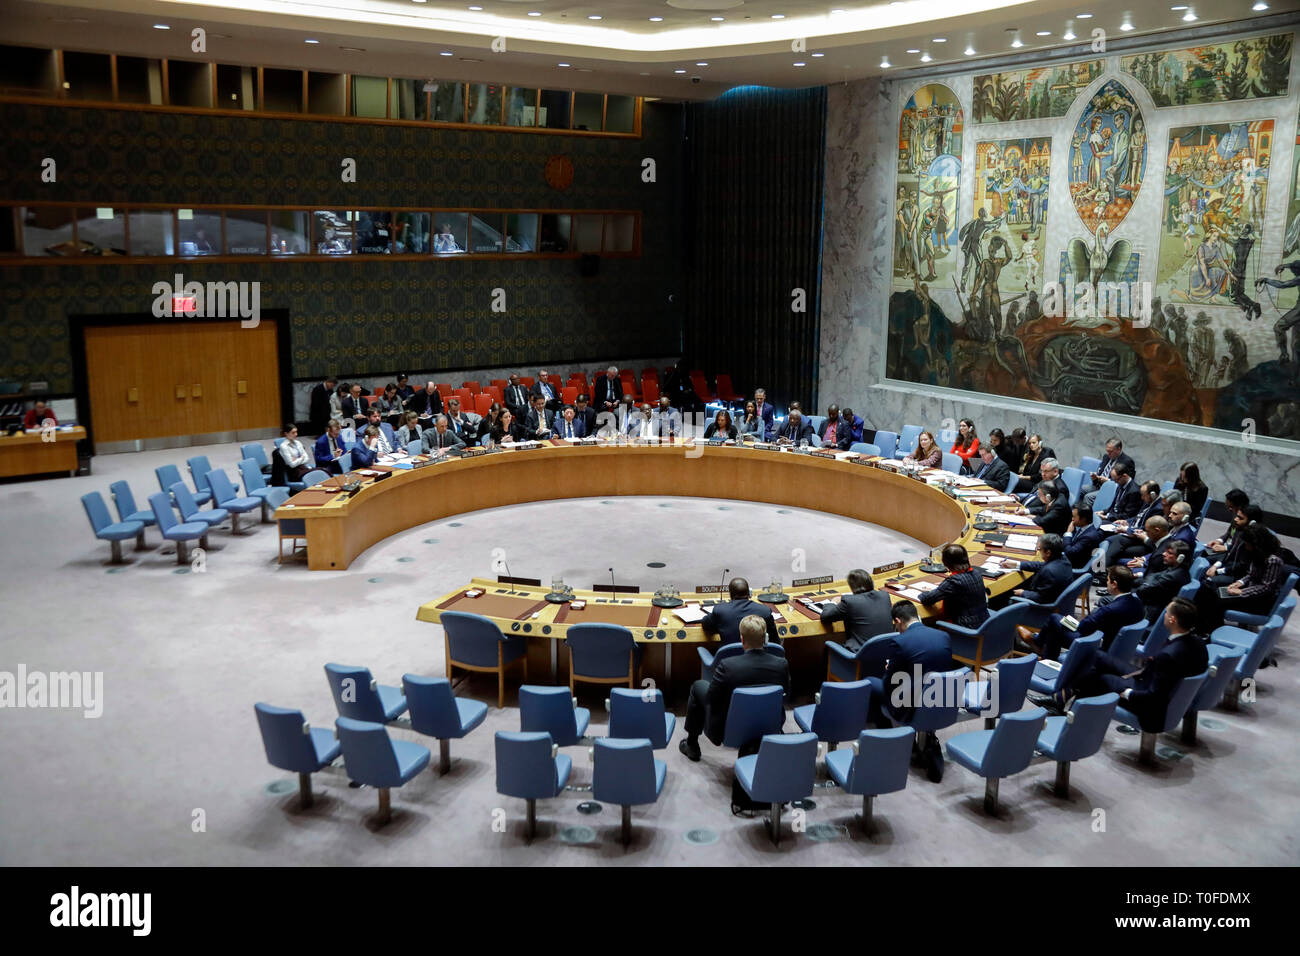 United Nations. 19th Mar, 2019. The photo taken on March 19, 2019 shows a general view of the United Nations Security Council meeting on non-proliferation of weapons of mass destruction (WMDs), at the United Nations headquarters in New York. Credit: Li Muzi/Xinhua/Alamy Live News Stock Photo